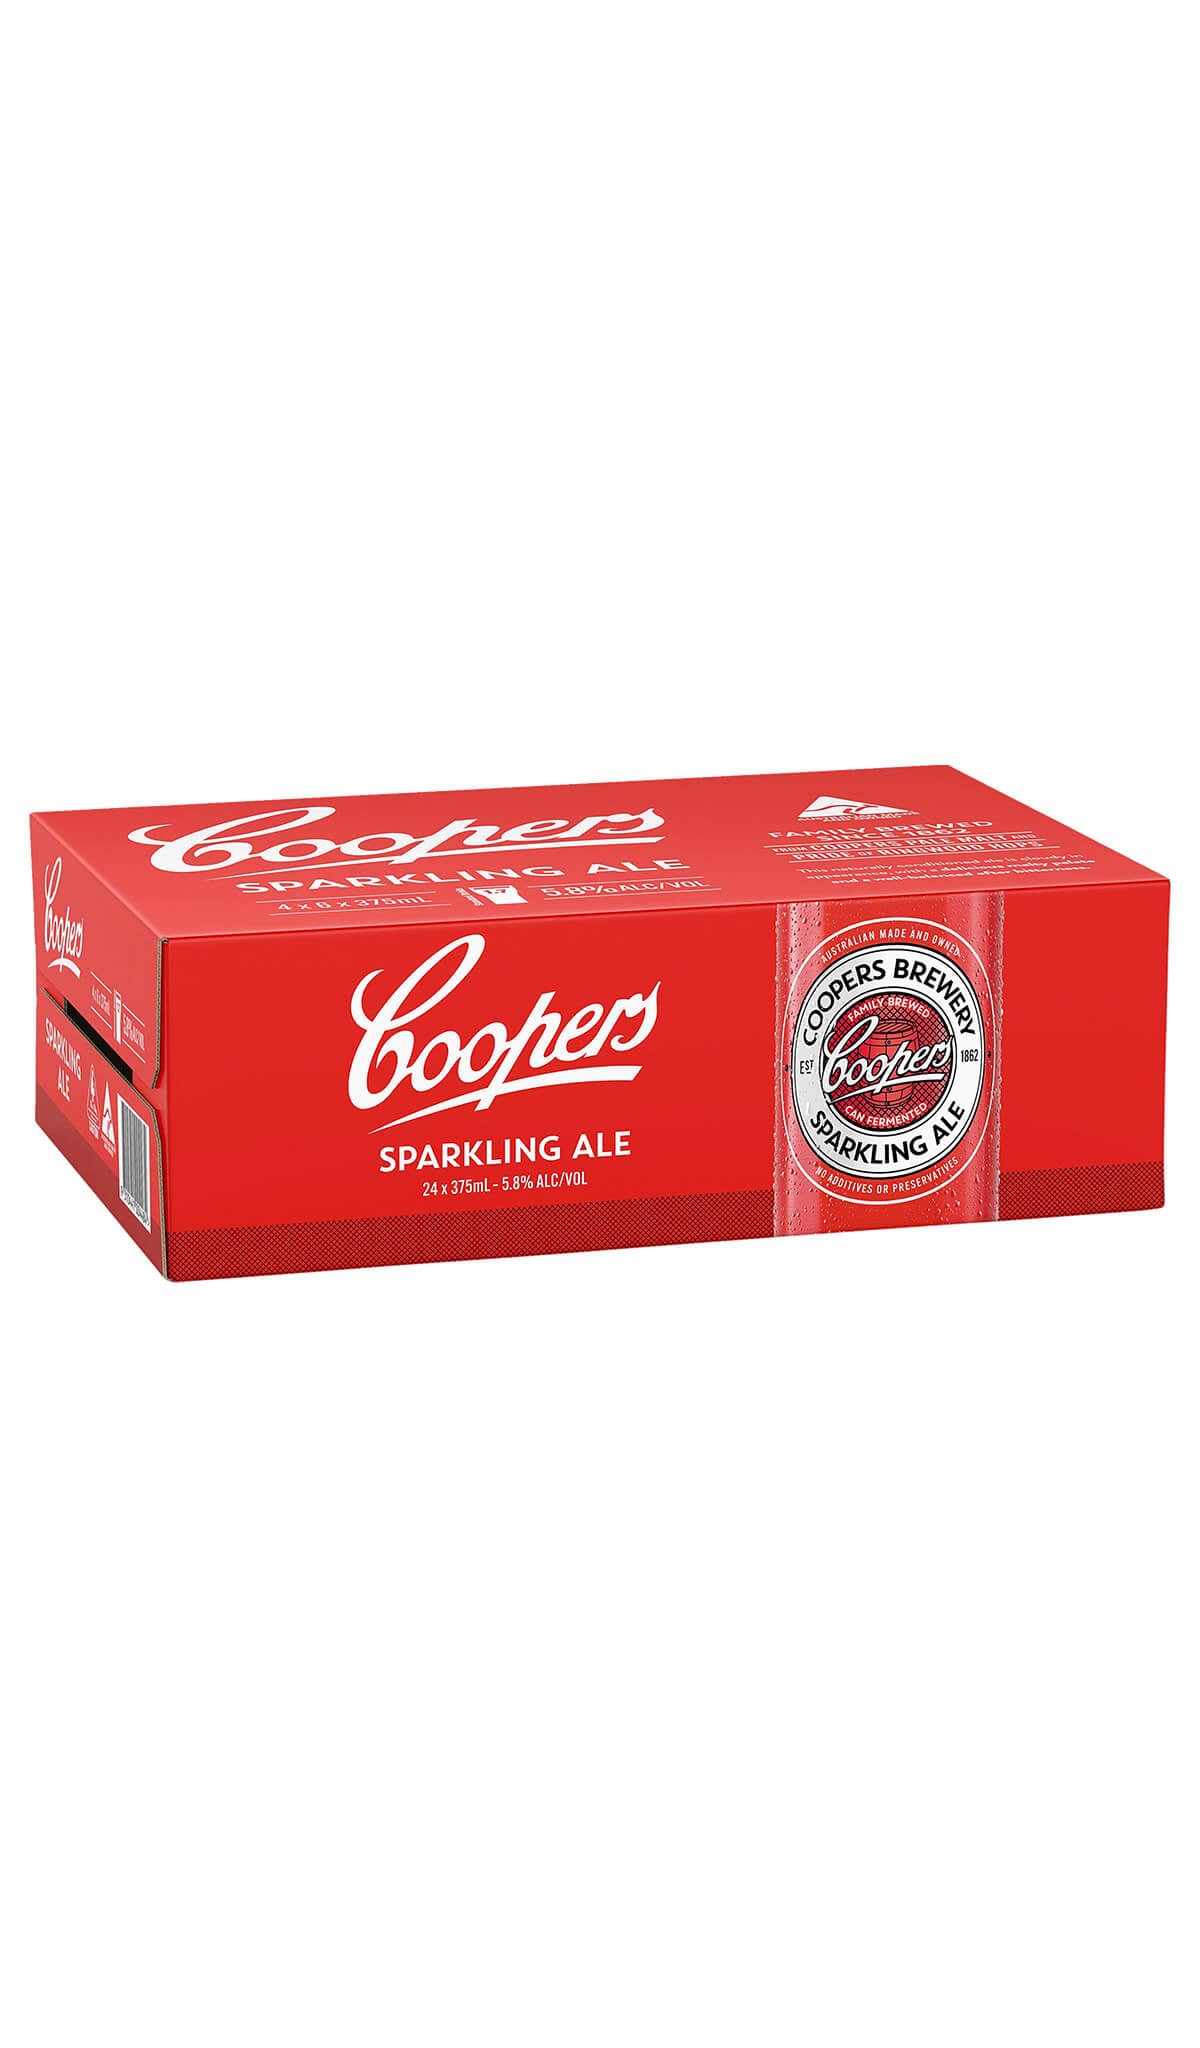 Find out more, explore the range and purchase Coopers Sparkling Ale 24x375ml can slab online at Wine Sellers Direct - Australia's independent liquor specialists.